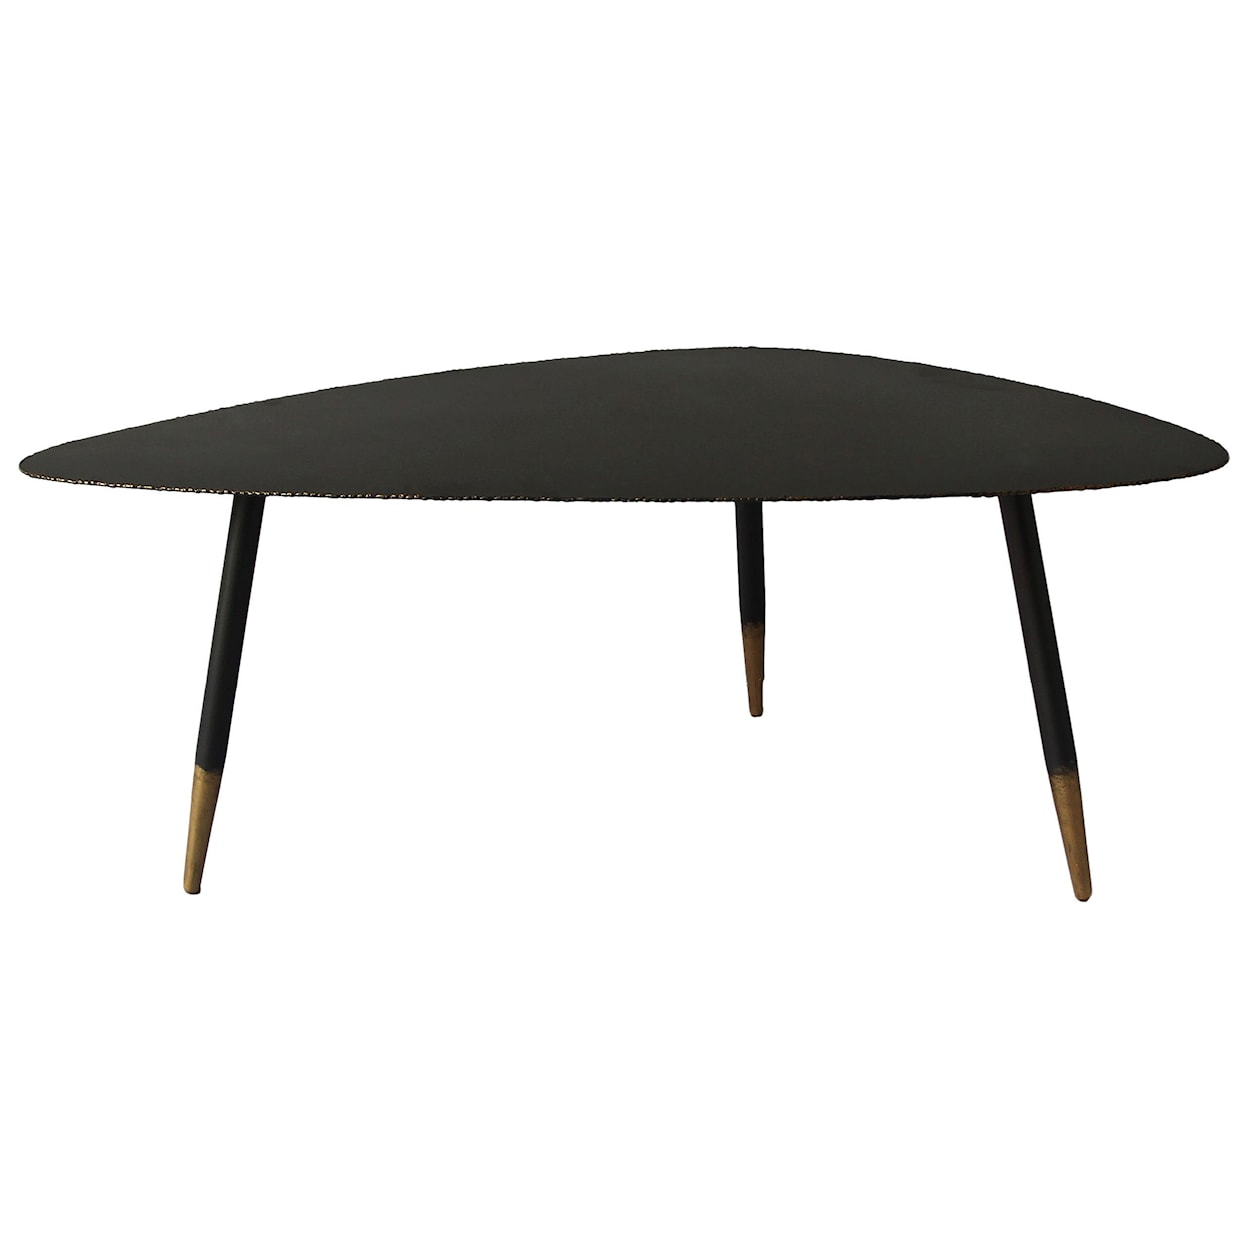 Moe's Home Collection Bruno Metal Coffee Table